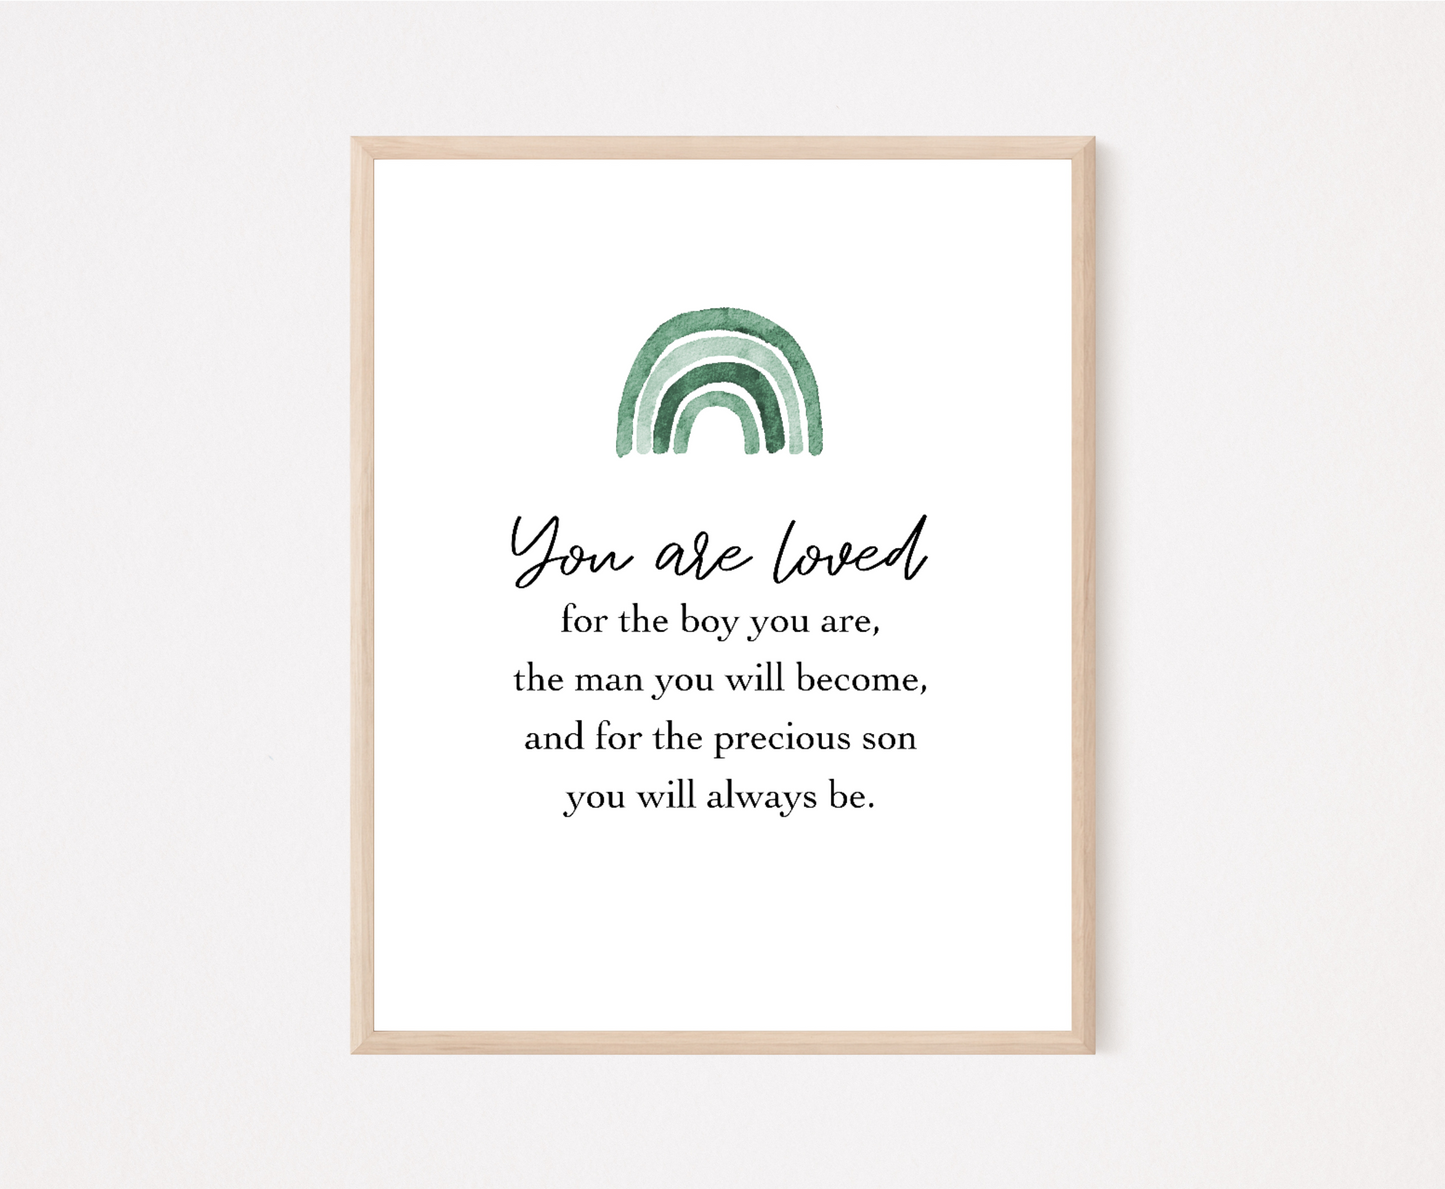 A frame showing a graphic for a little boy’s room that has an ombre green rainbow design and includes the following “You are loved, for the boy you are, the man you will become, and for the precious son you will always be.” 